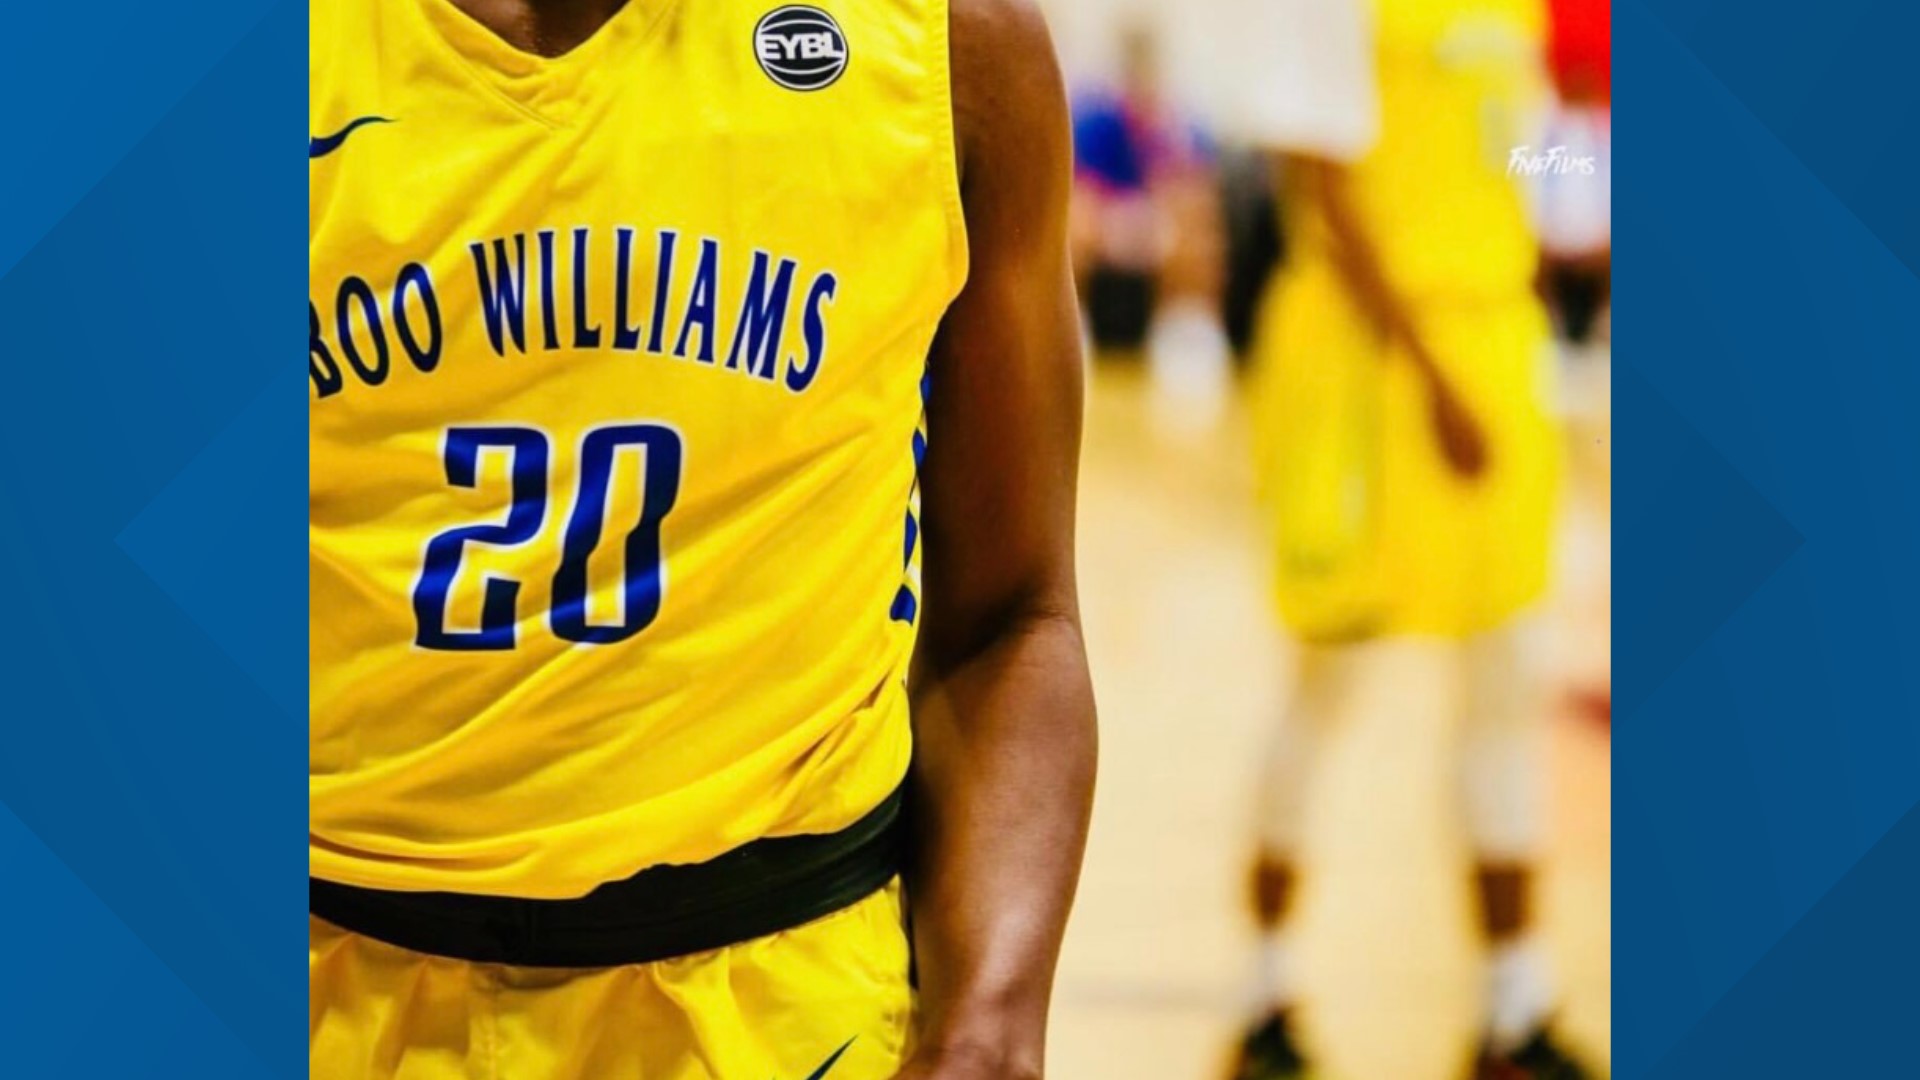 On Saturday night in Hampton Roads it was the Boo Williams Sneaker Gala marking the 40th Anniversary of the Boo Williams Summer League Celebration